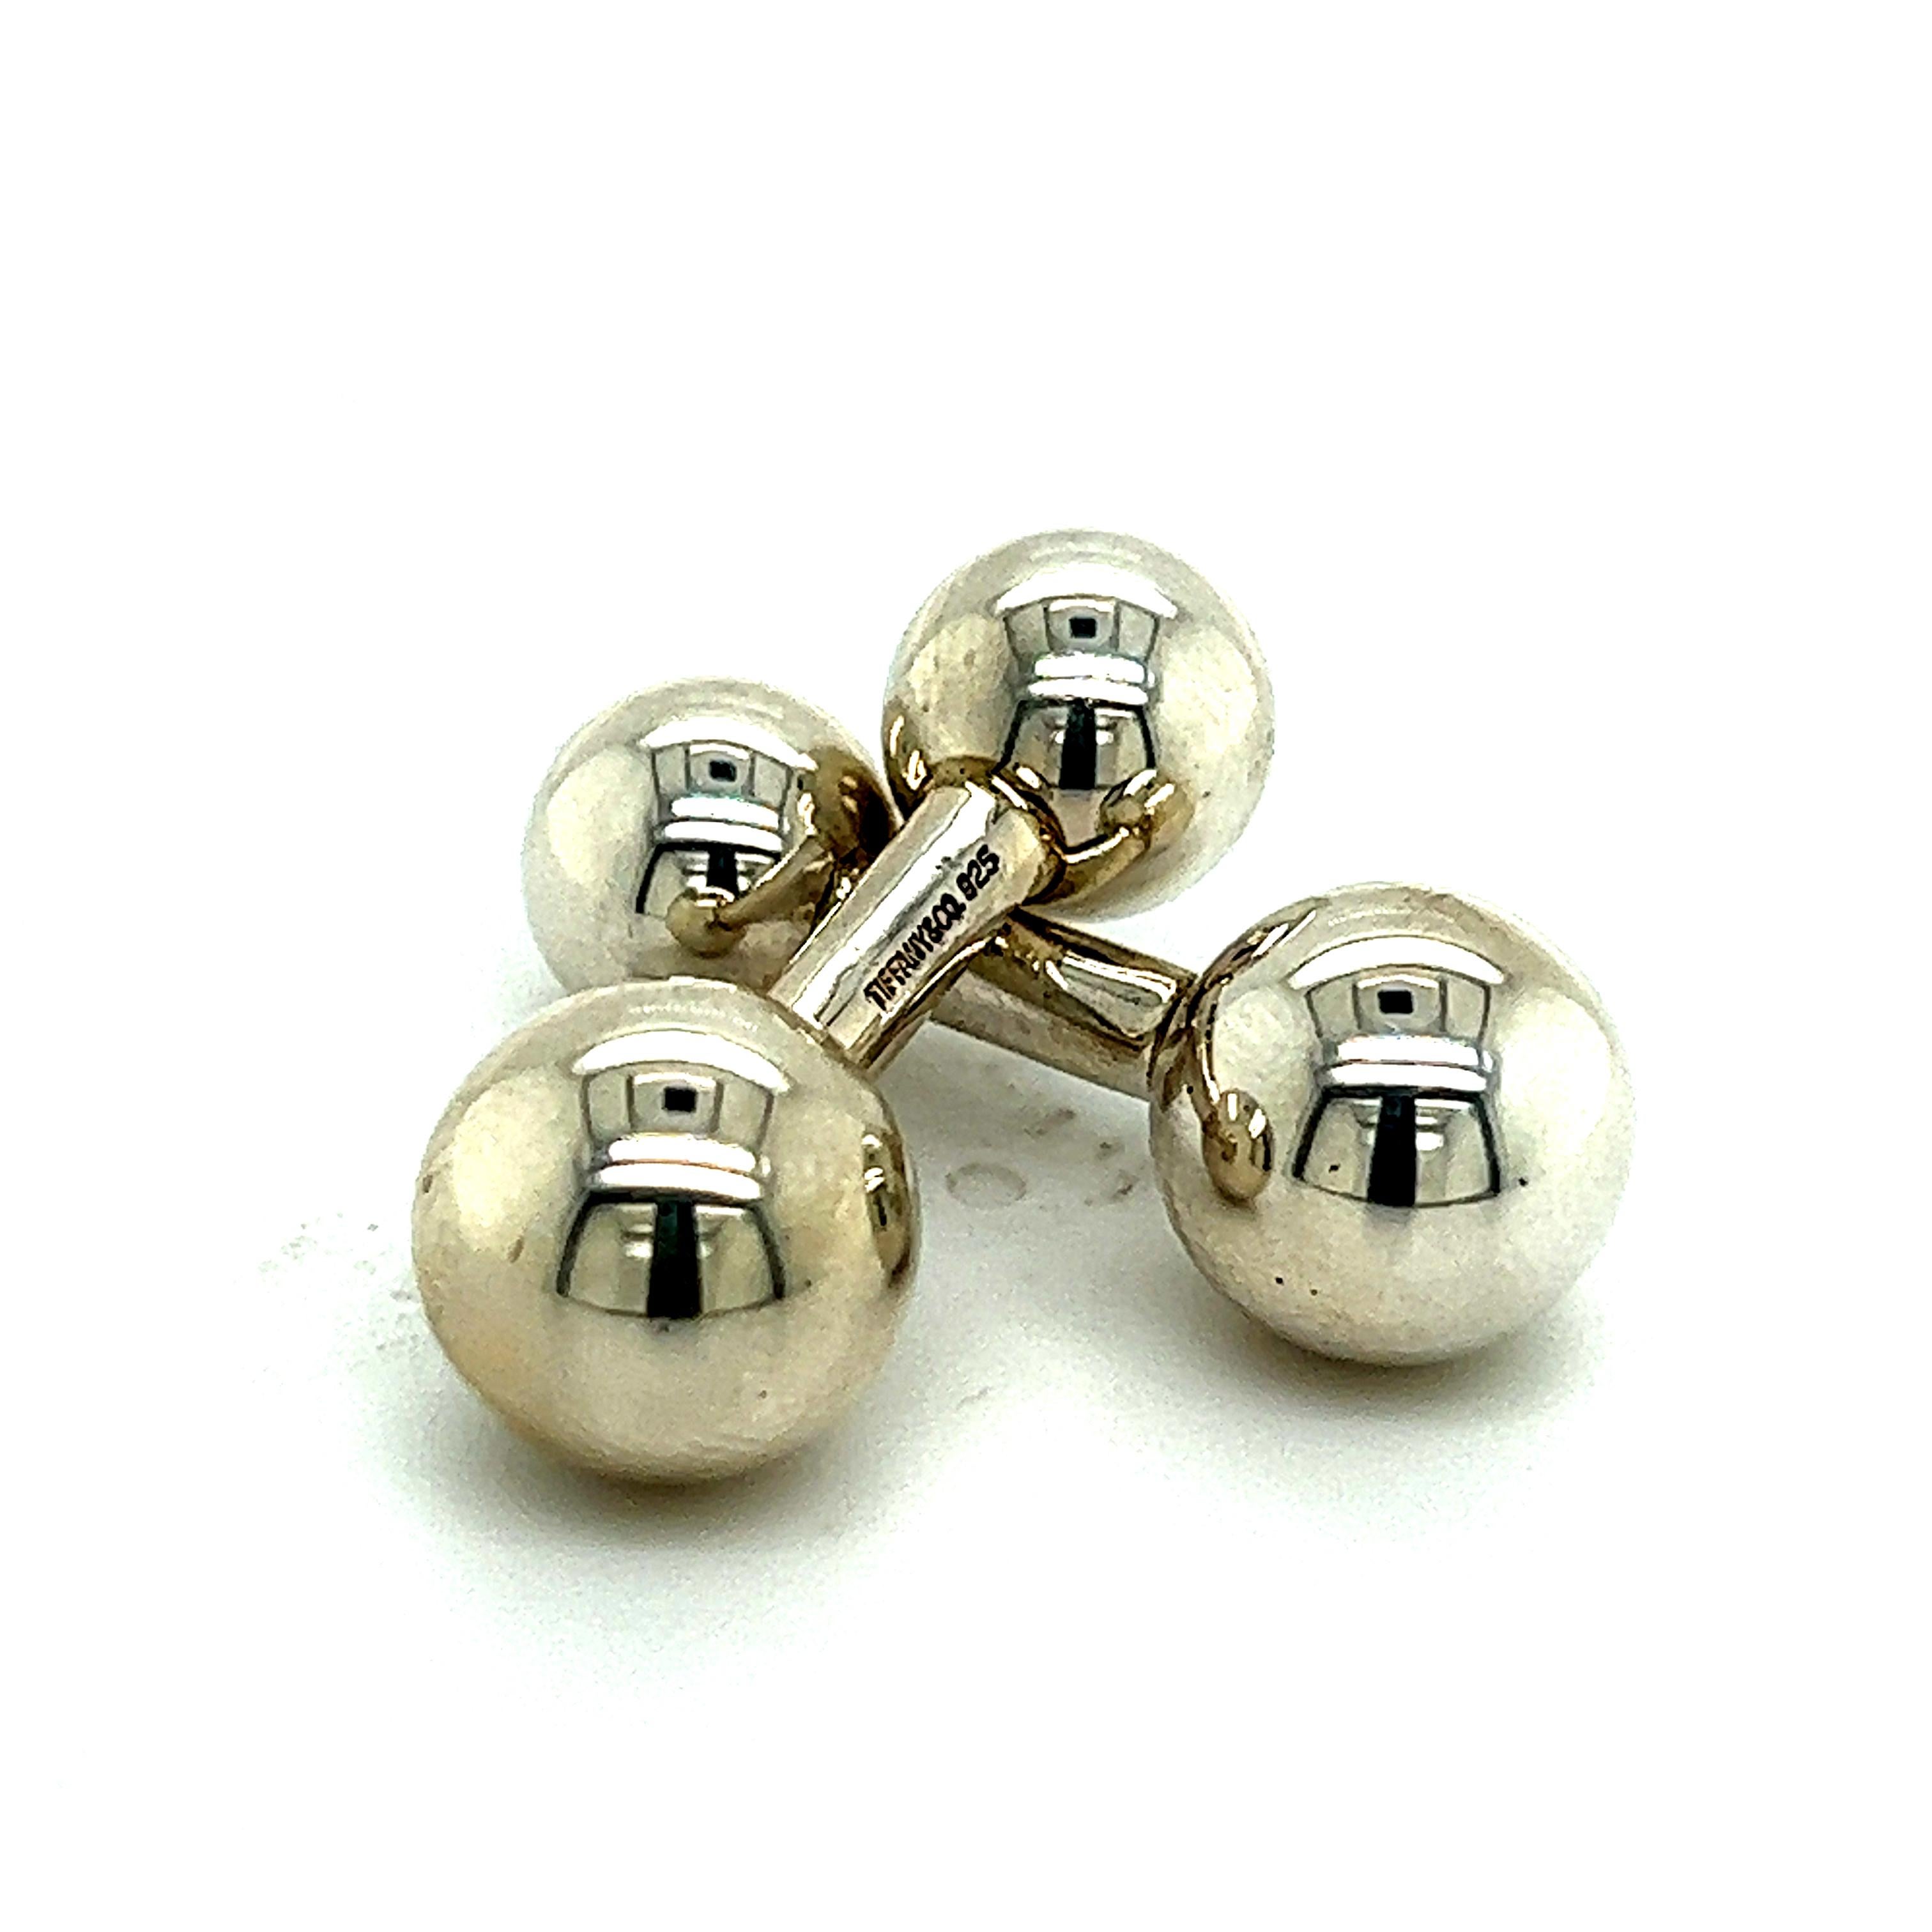 Tiffany & Co Estate Mens Barbell Cufflinks Silver TIF497

TRUSTED SELLER SINCE 2002

PLEASE SEE OUR HUNDREDS OF POSITIVE FEEDBACKS FROM OUR CLIENTS!!

FREE SHIPPING

DETAILS
Weight: 13 Grams
Metal: Silver

These Authentic Tiffany & Co. Men's